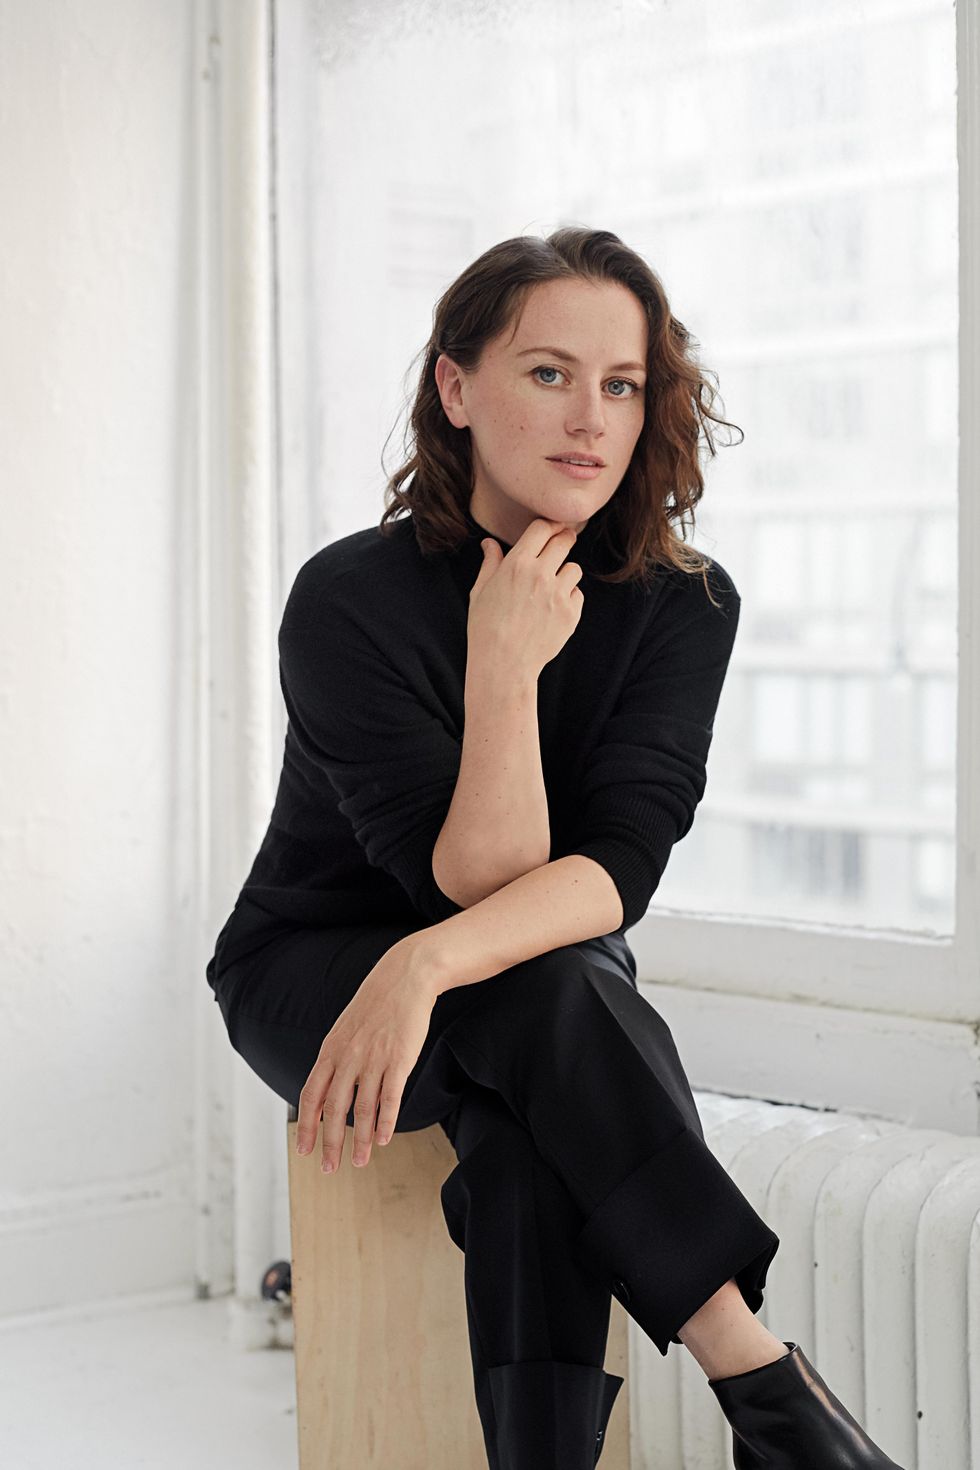 Helen Simoneau, a young, white brunette woman, looks questioningly at the camera, dressed in all black as she sits with her legs crossed, a hand caressing her chin.